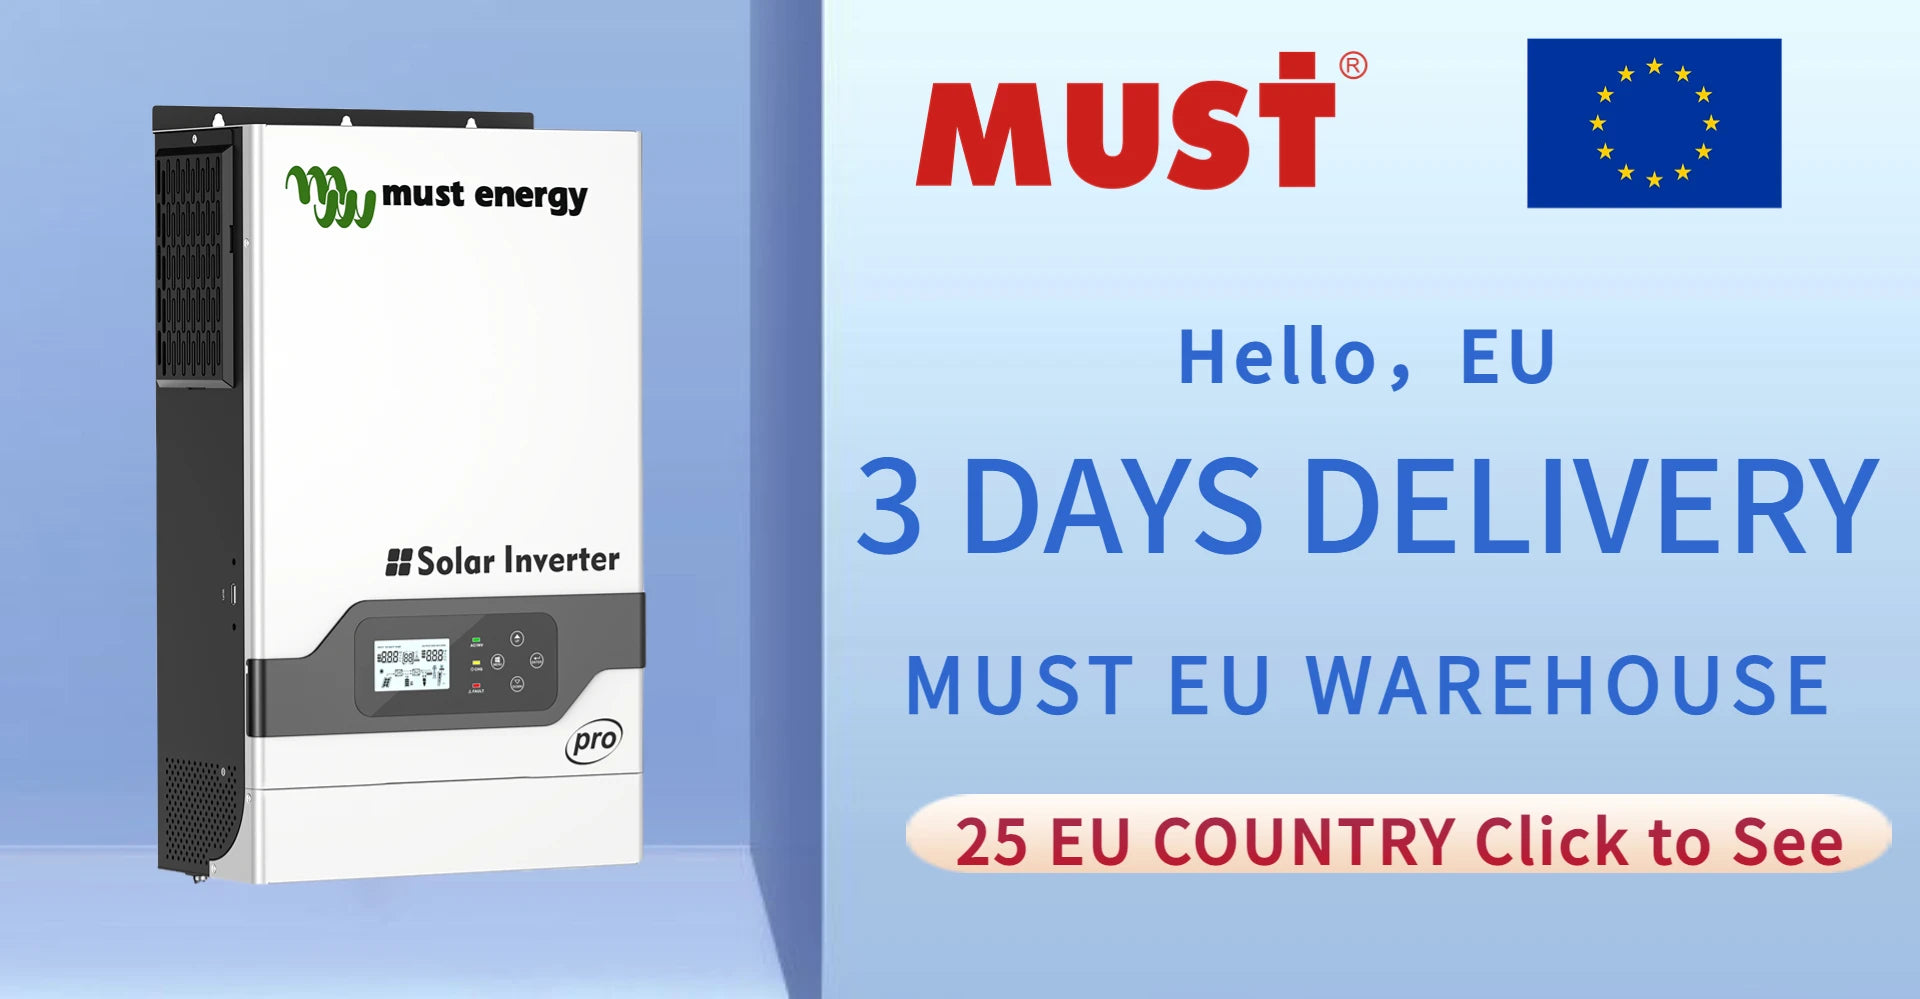 Fast delivery within 3 days from EU warehouse, ships to 25 European countries.